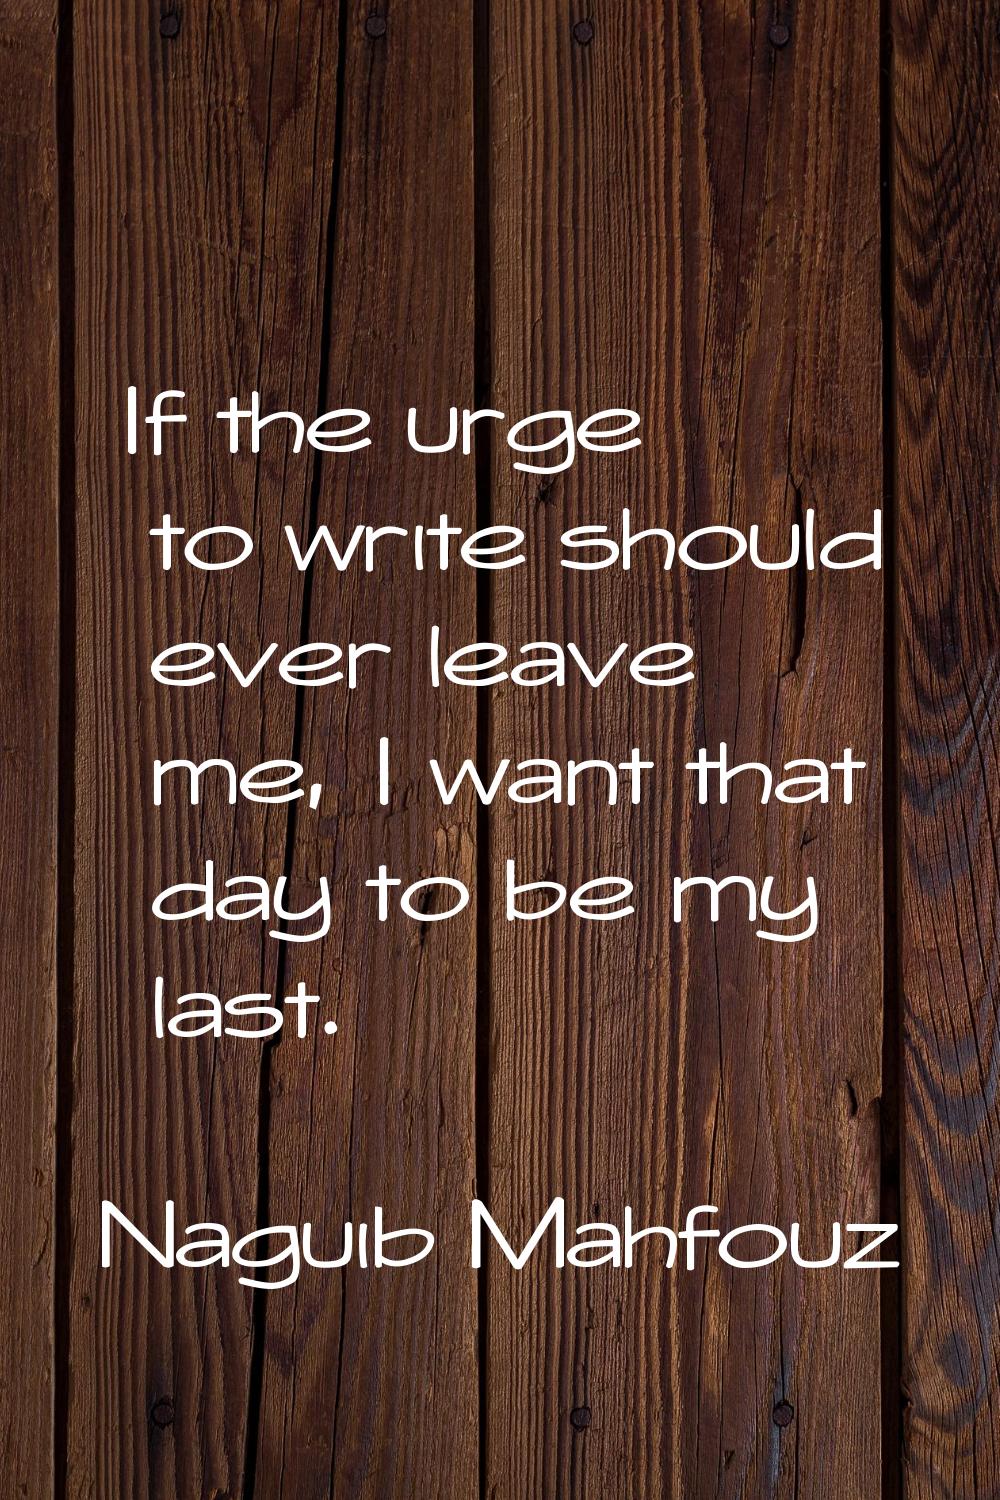 If the urge to write should ever leave me, I want that day to be my last.